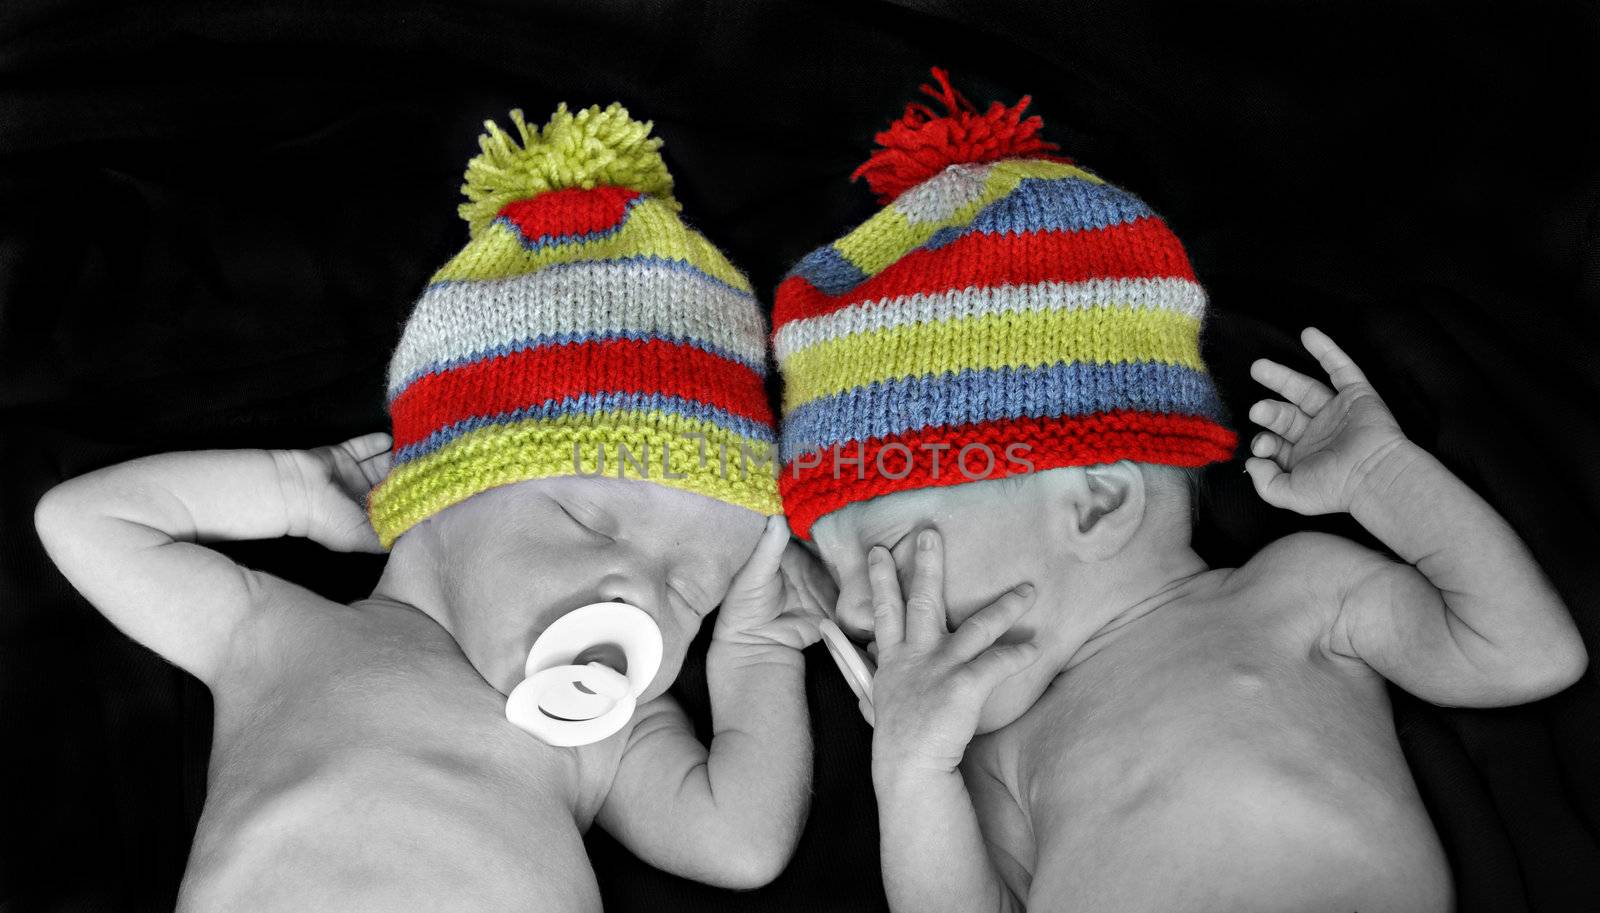 New born twins with colorful hats